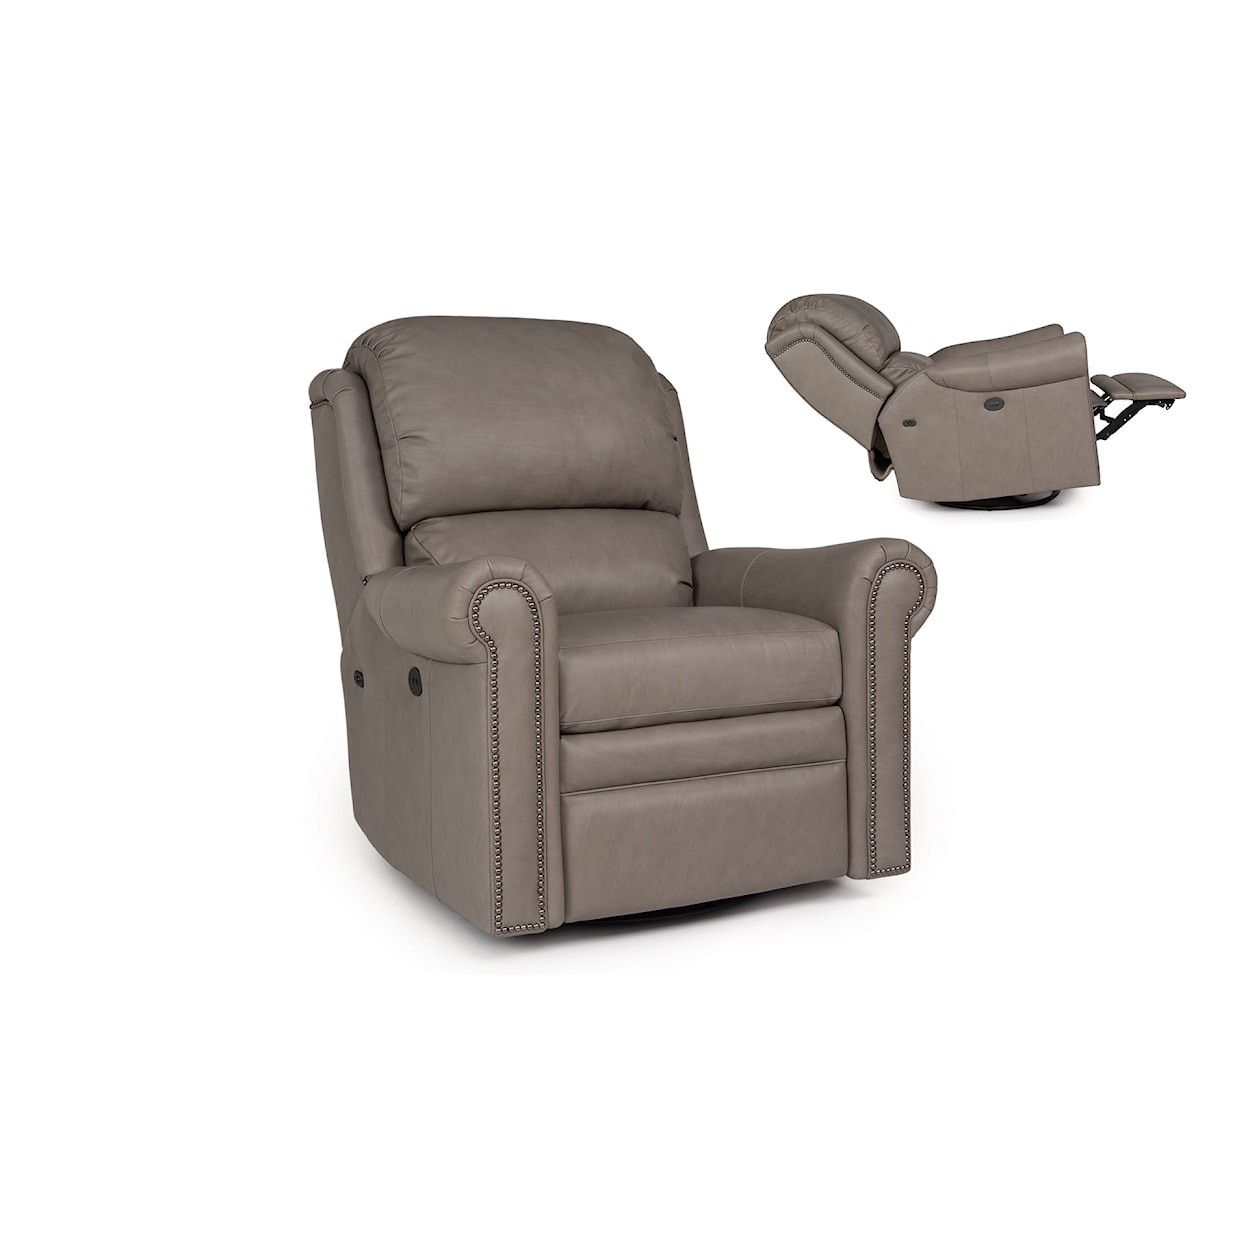 Smith Brothers 780 Motorized Reclining Chair